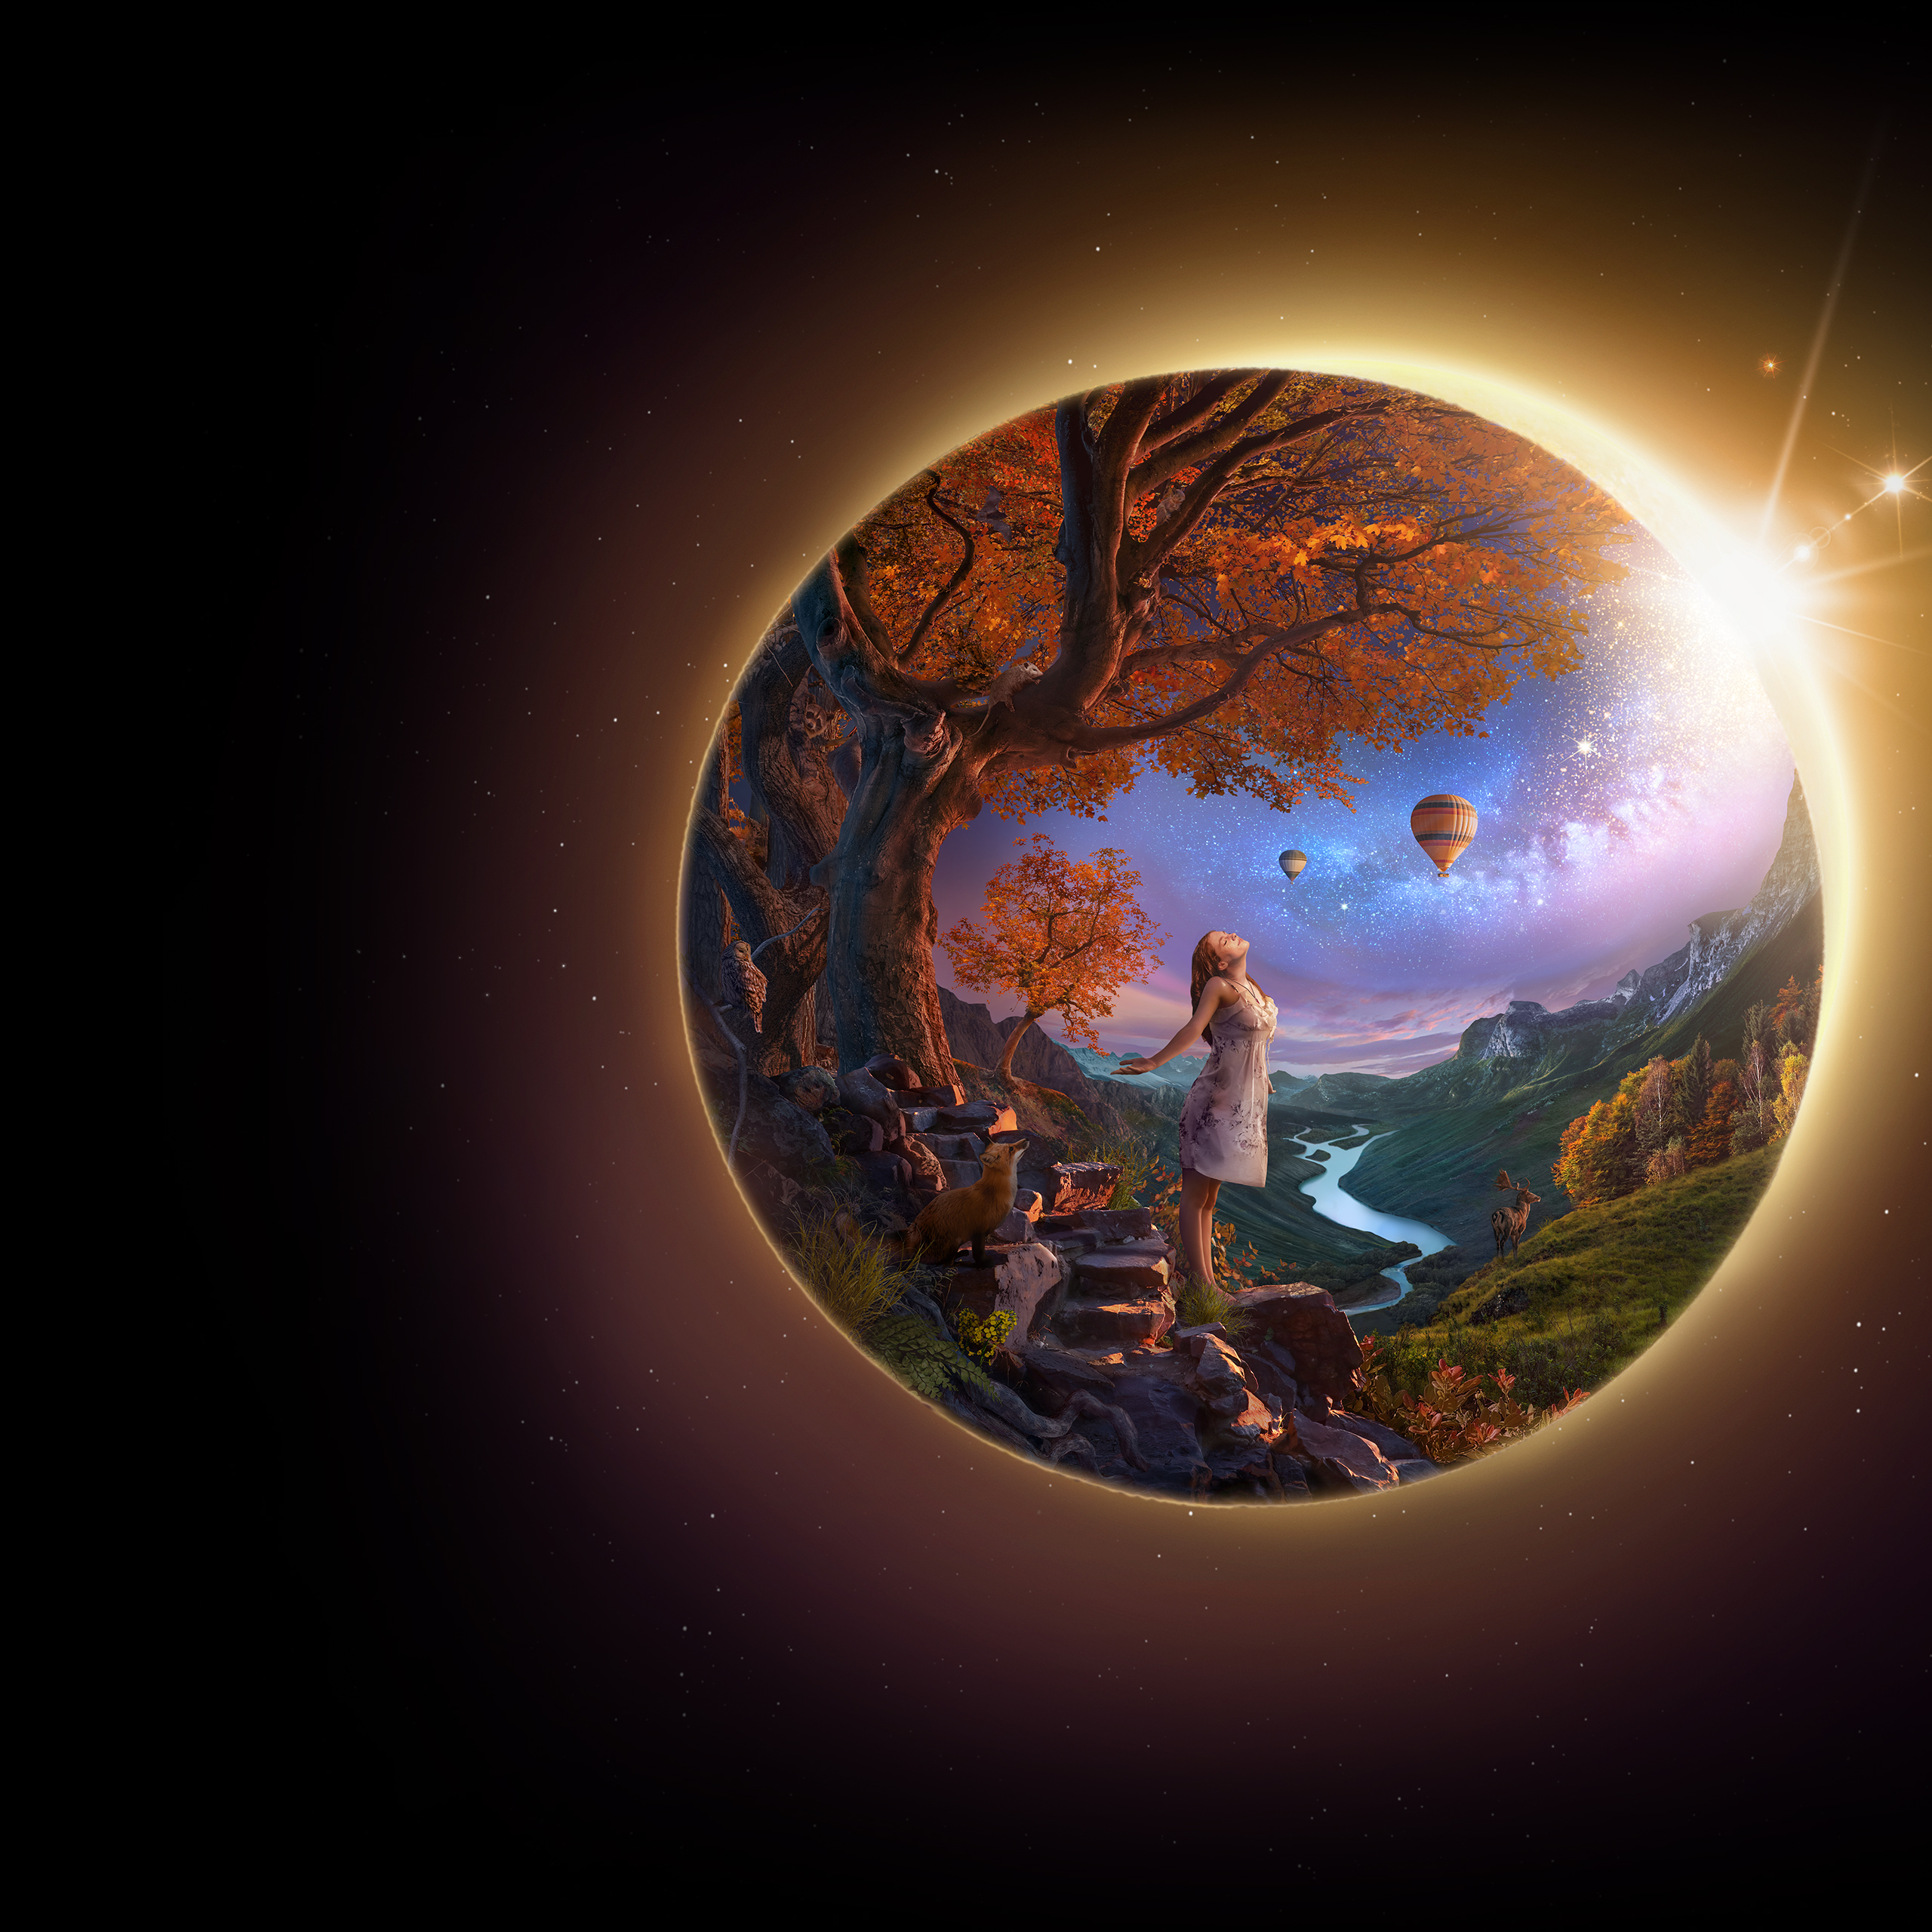 An artist’s concept of a landscape framed inside a sphere, which doubles as an eclipse. The concept is composed of dusky purples, oranges, golds, and greens. In the left foreground, a young woman wearing a white dress basks in the rays of a solar eclipse. She stands under a bright orange fall tree rooted to the side of a rocky mountain trail. The scene overlooks a valley with a river running through the middle towards distant hazy blue mountains. Nocturnal animals – including a fox, owl, possum, and bat – emerge to investigate the sudden onset of night. A deer stands on a grassy knoll at right in front of a line of fall colored trees. The Milky Way trails across the sky, leading up from the young woman to the eclipse and glittering stars at top right. Two hot air balloons float in the distance. This concept was created in celebration of the Heliophysics Big Year, which is bookended by the Annular Eclipse in October of 2023 and the Total Solar Eclipse in April of 2024. It also serves as the cover of the 2024 NASA Science Planning Guide.